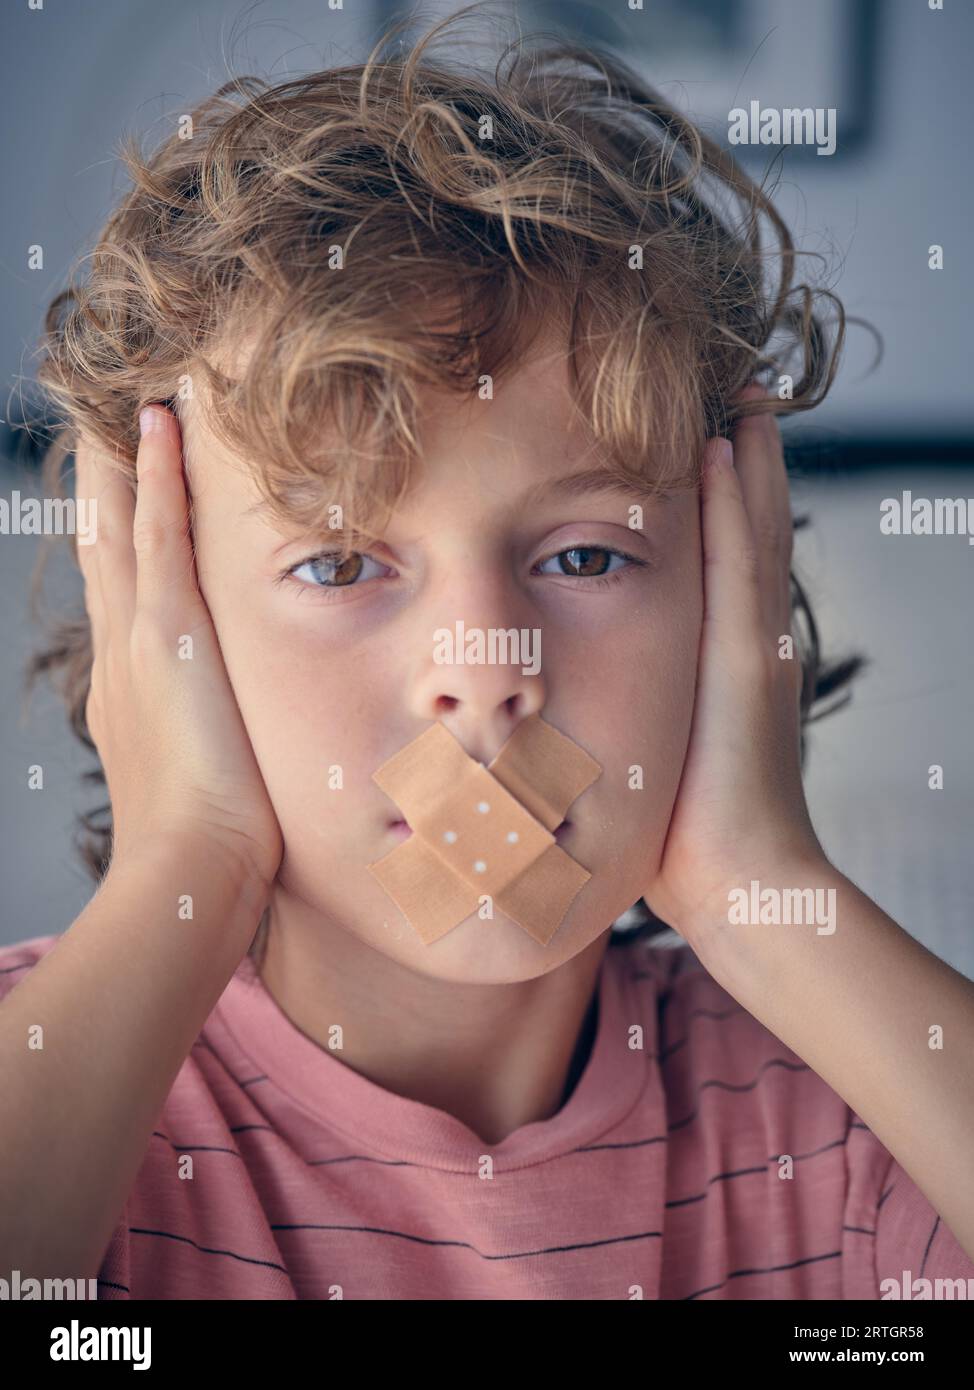 Curly blond haired child with plasters on lips looking at camera while covering ears with hands Stock Photo